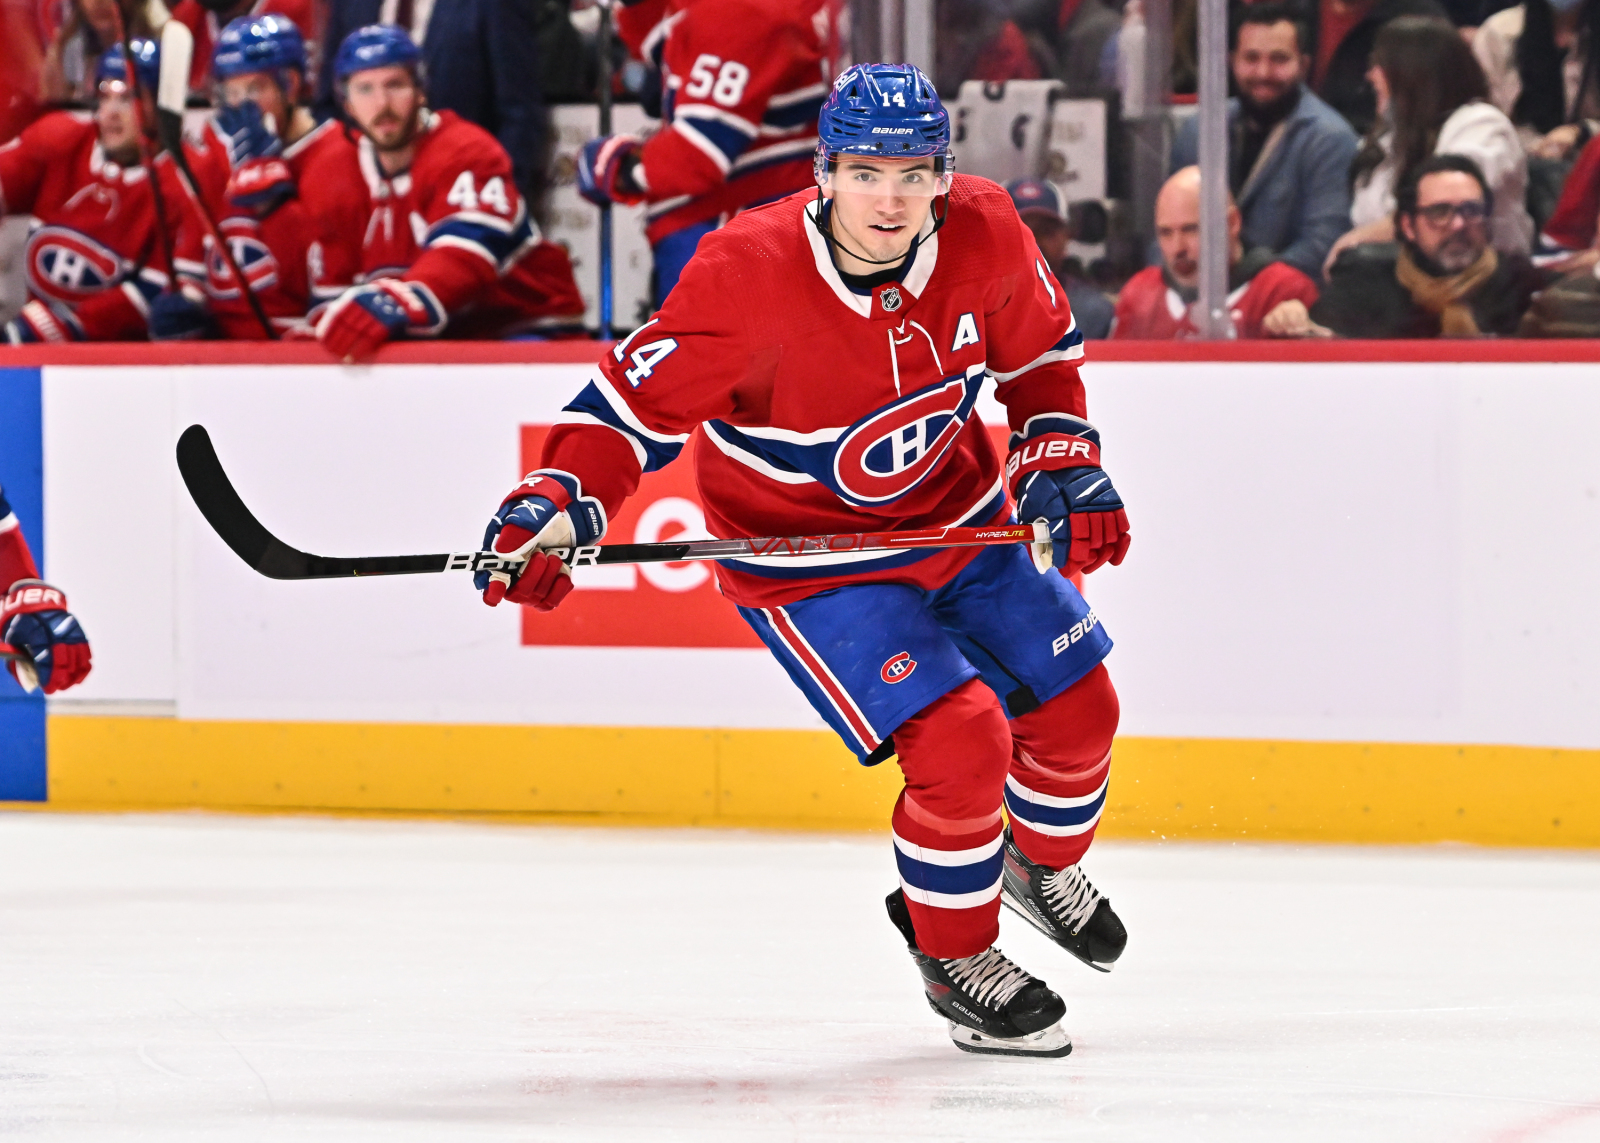 Quebec politicos: New Habs captain Suzuki must learn French